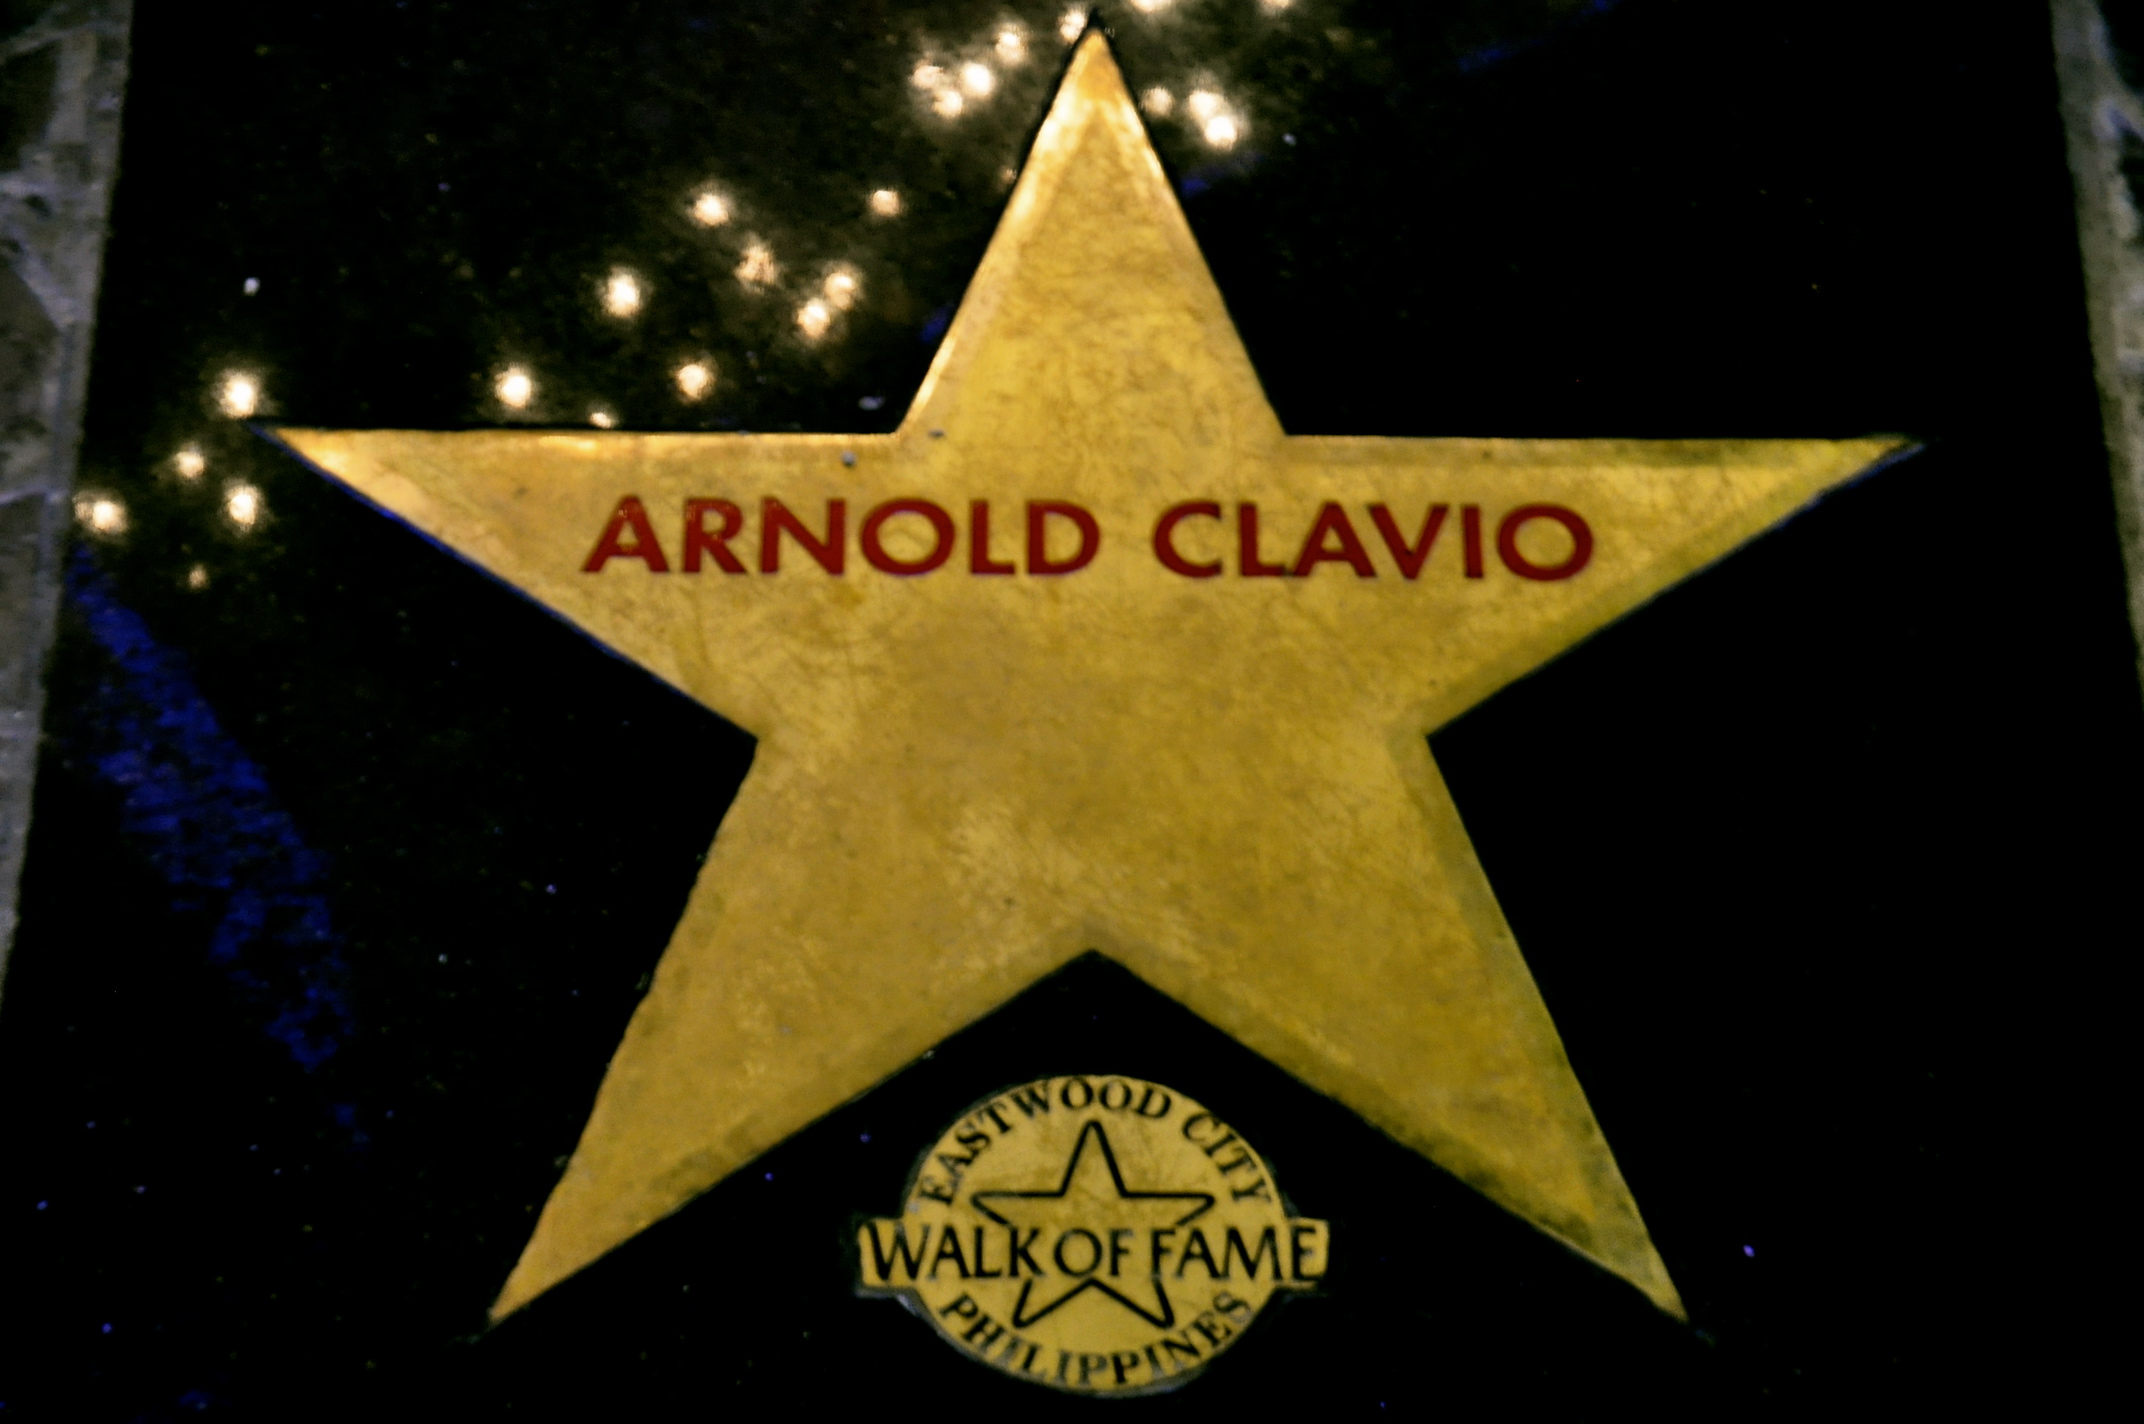 Arnold Clavio's Star in Eastwood City's Walk of Fame